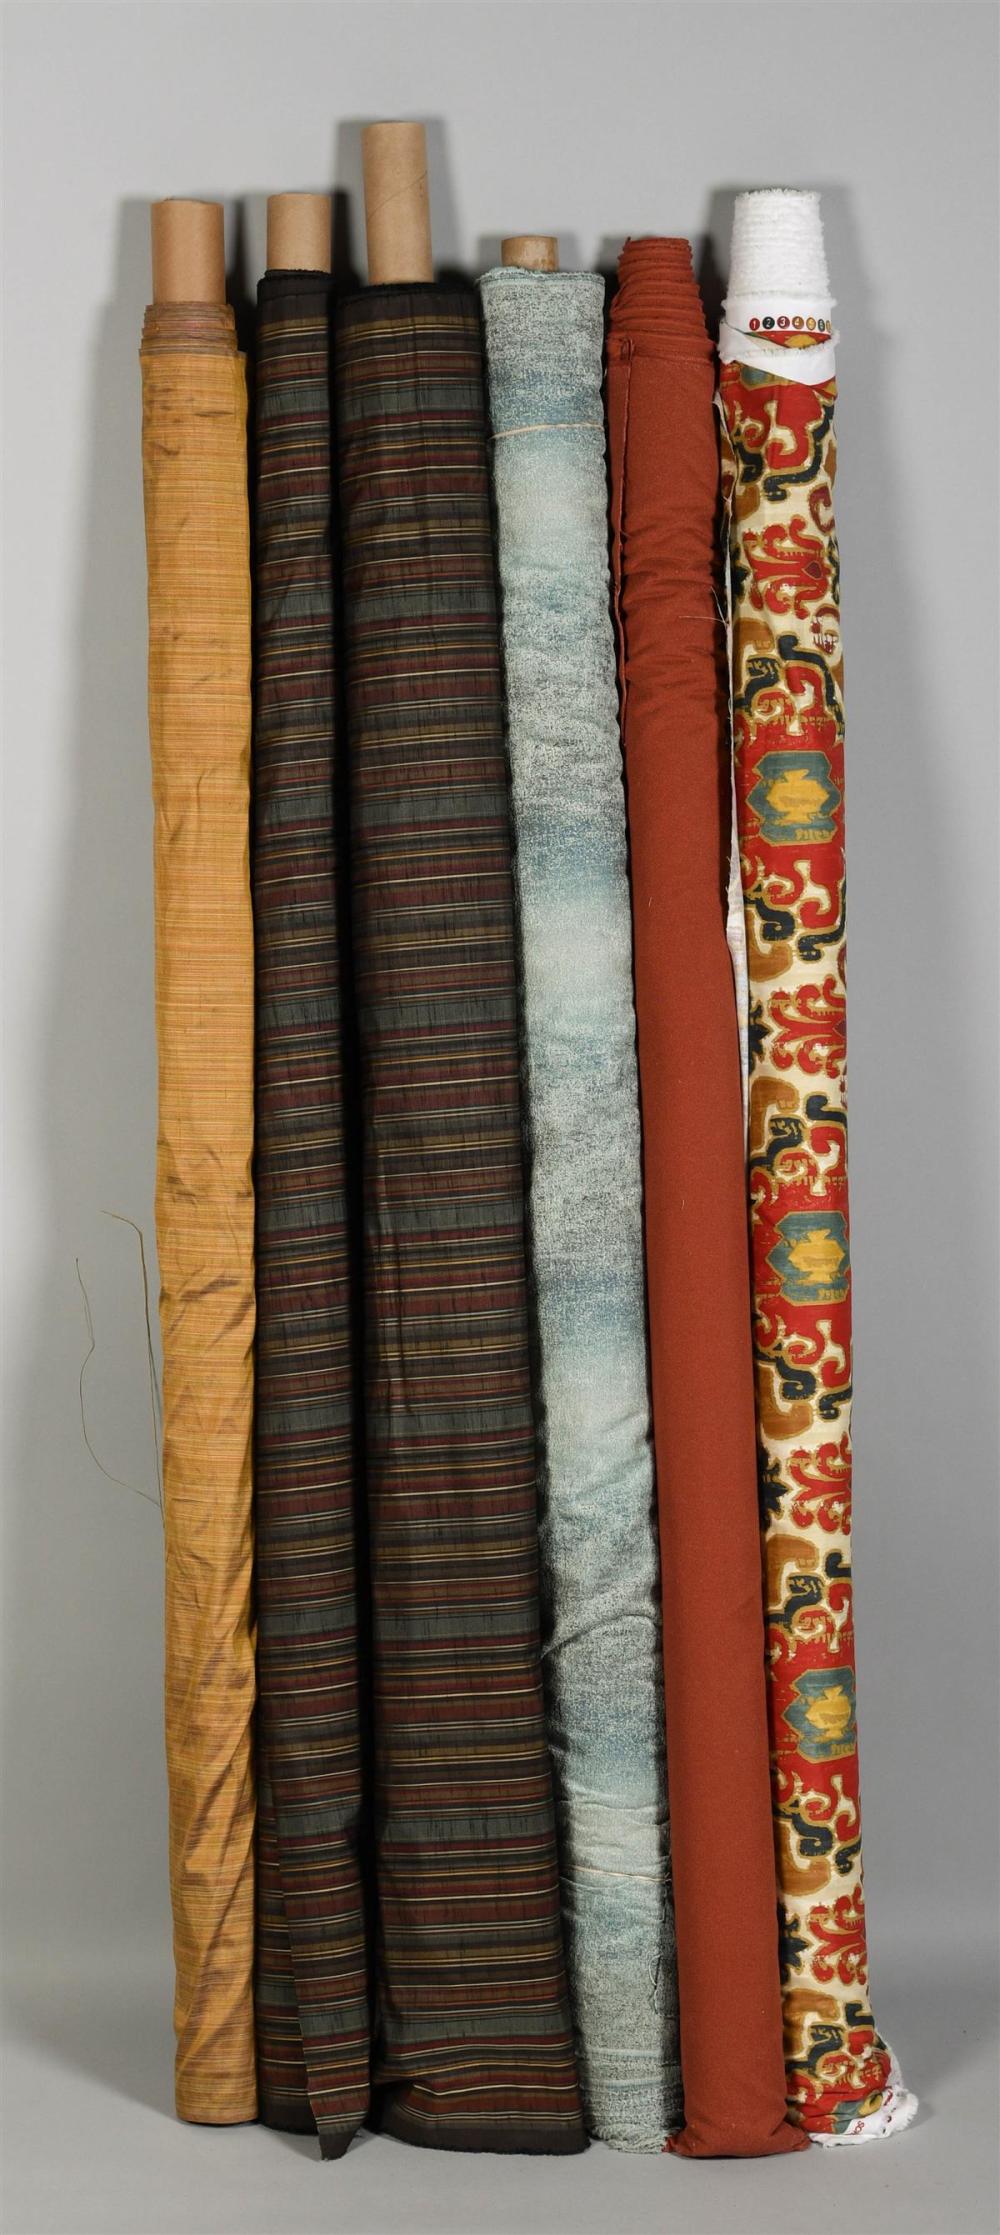 GROUP OF SIX ASSORTED FABRIC LENGTHSGROUP